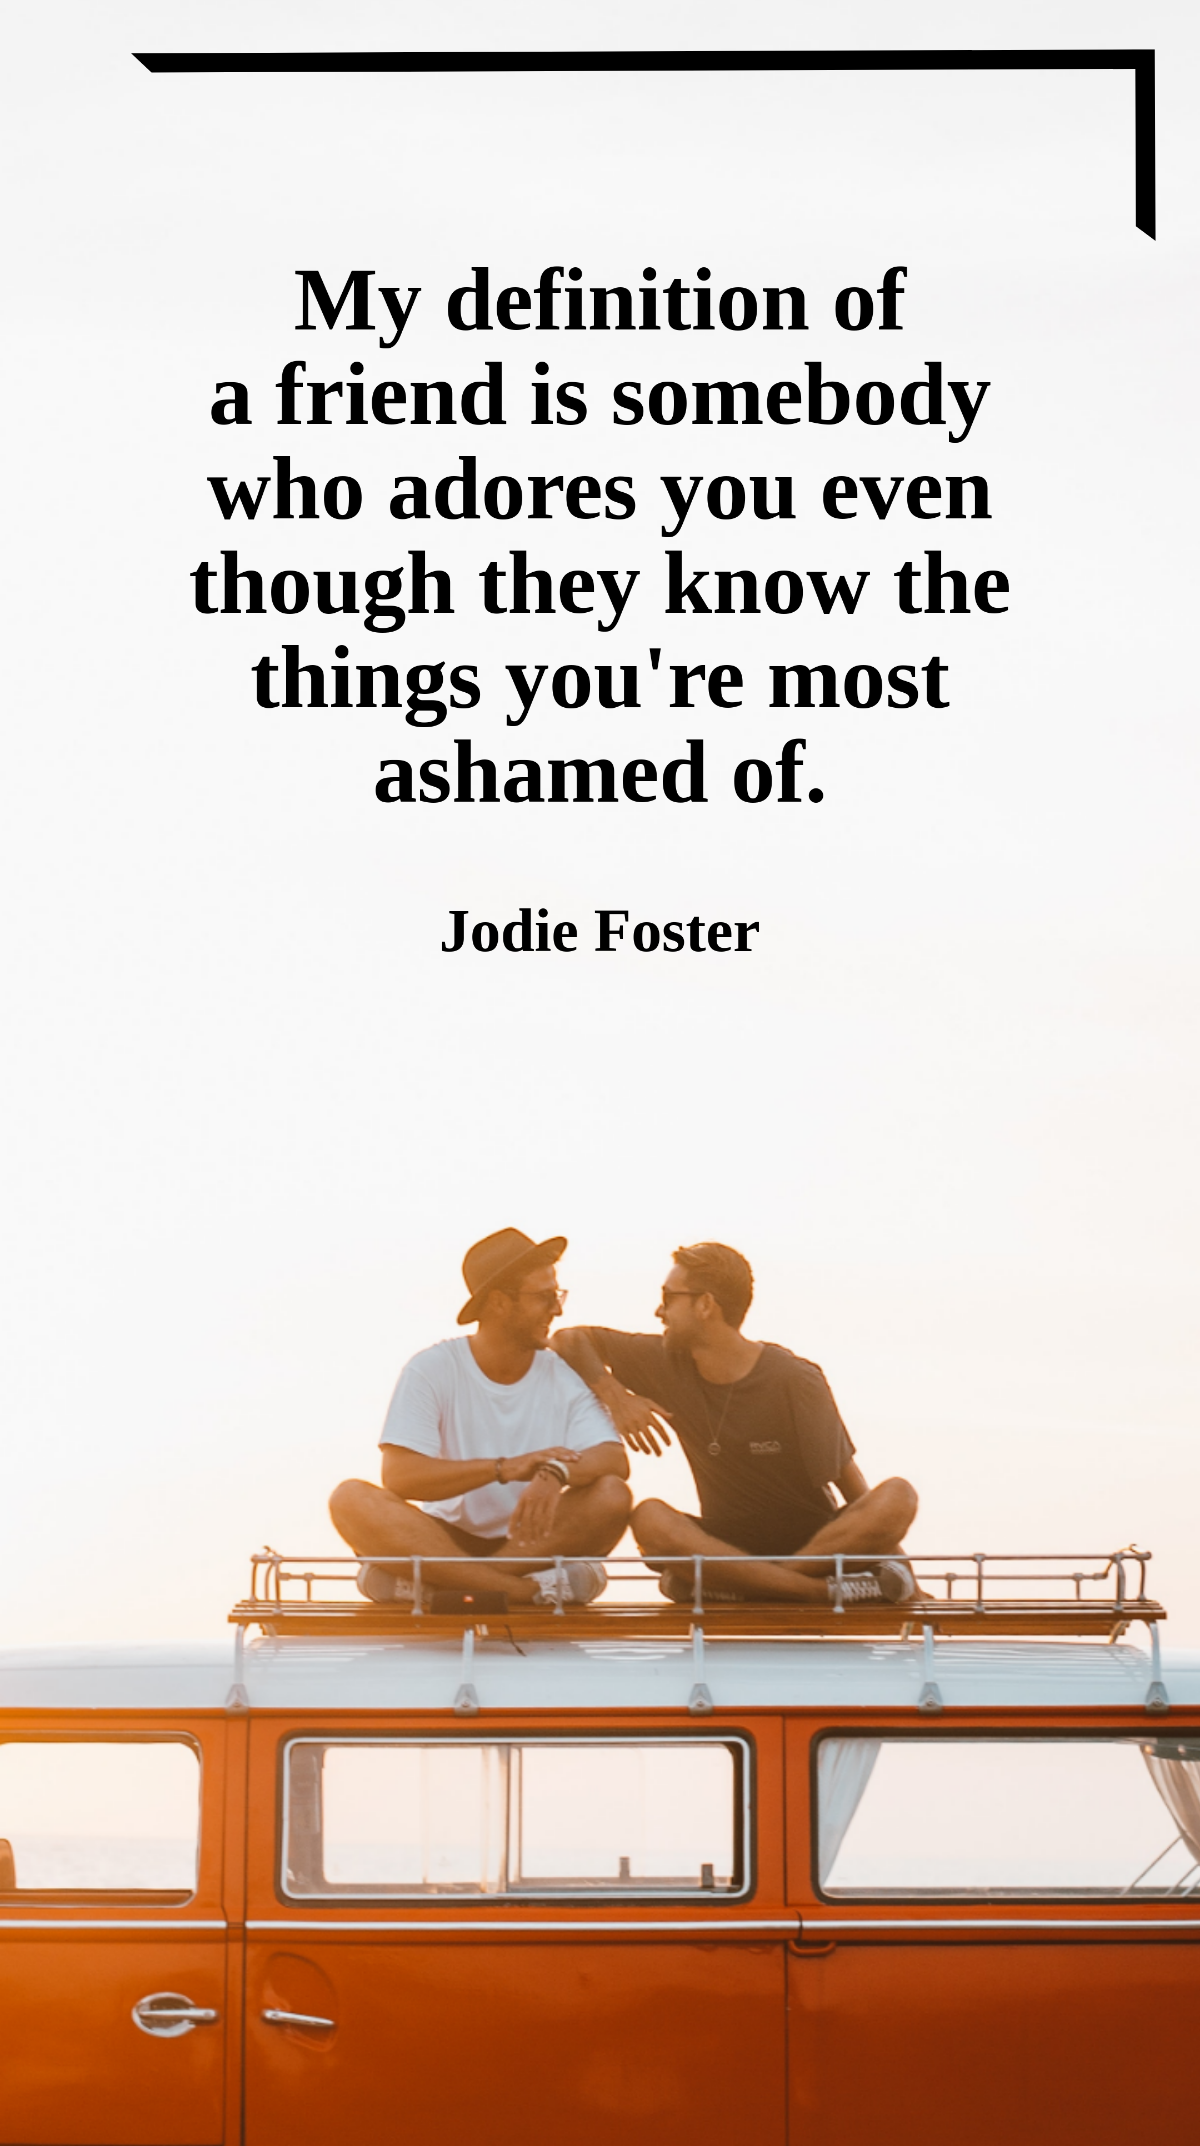 Jodie Foster - My definition of a friend is somebody who adores you even though they know the things you're most ashamed of. Template